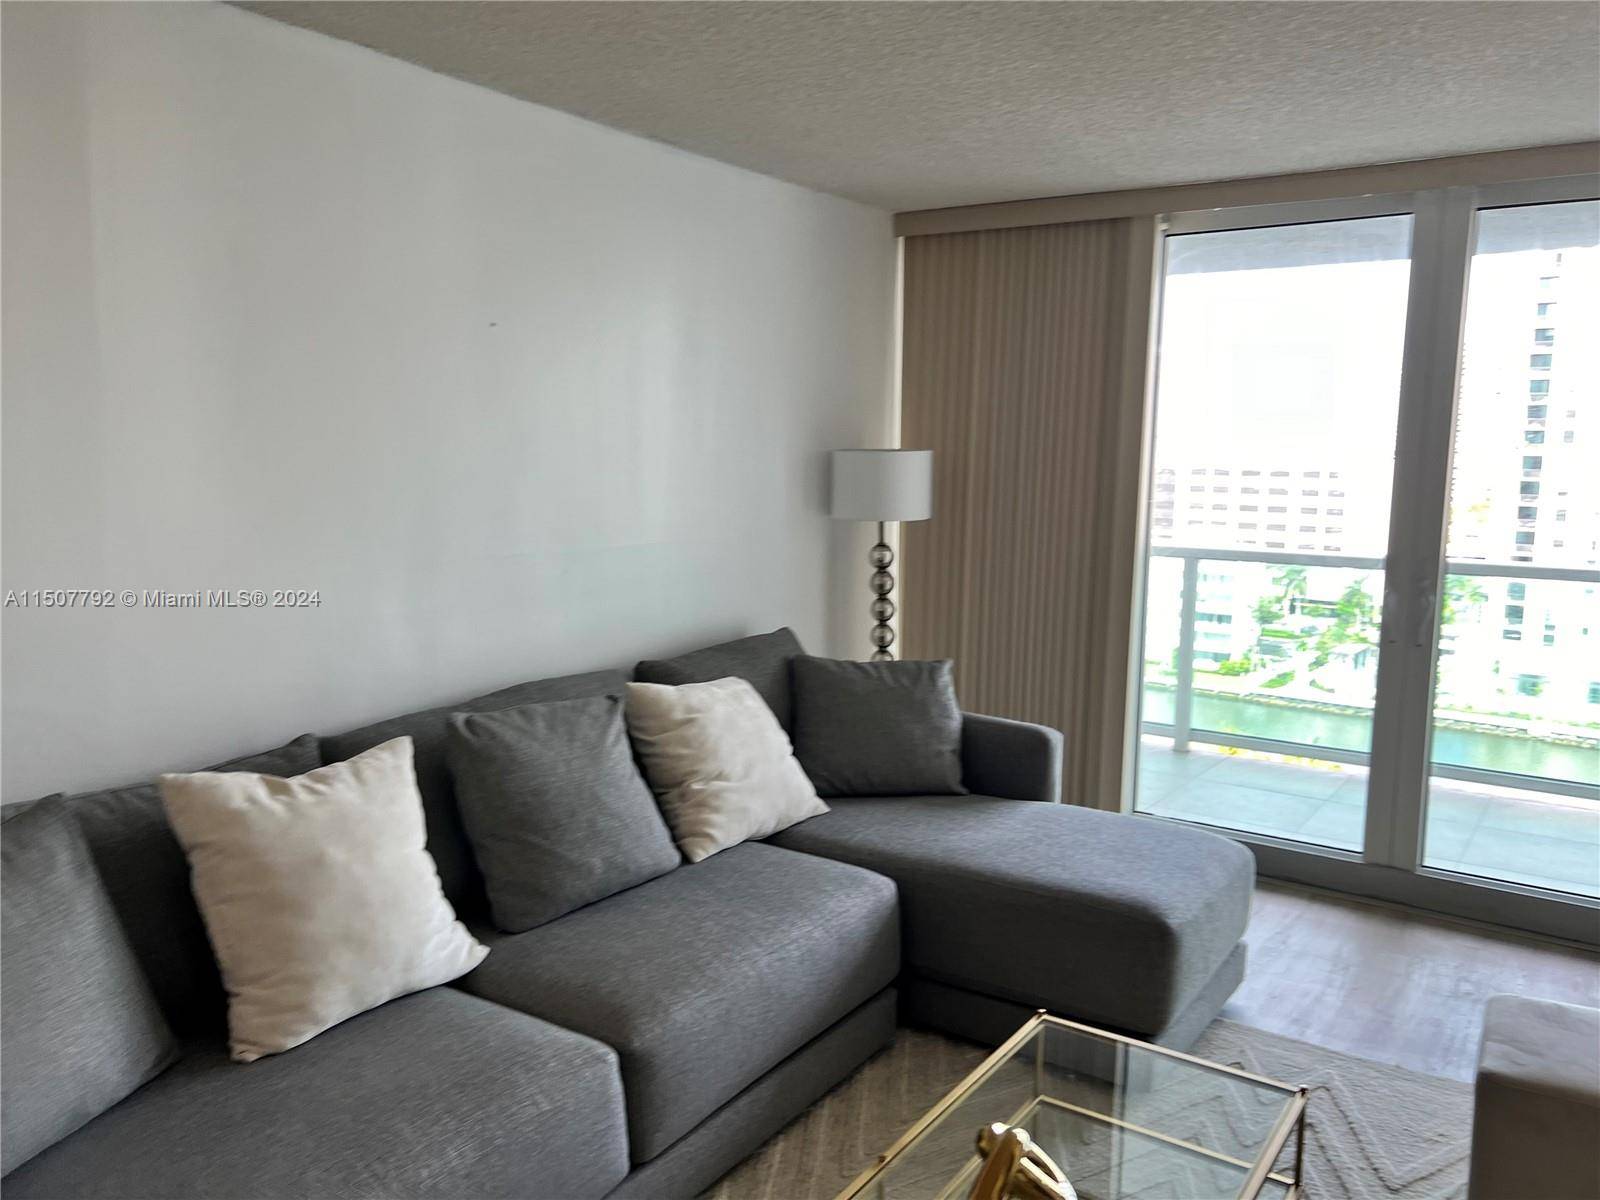 Amazing and completely renovated brand new fully furnished rental.